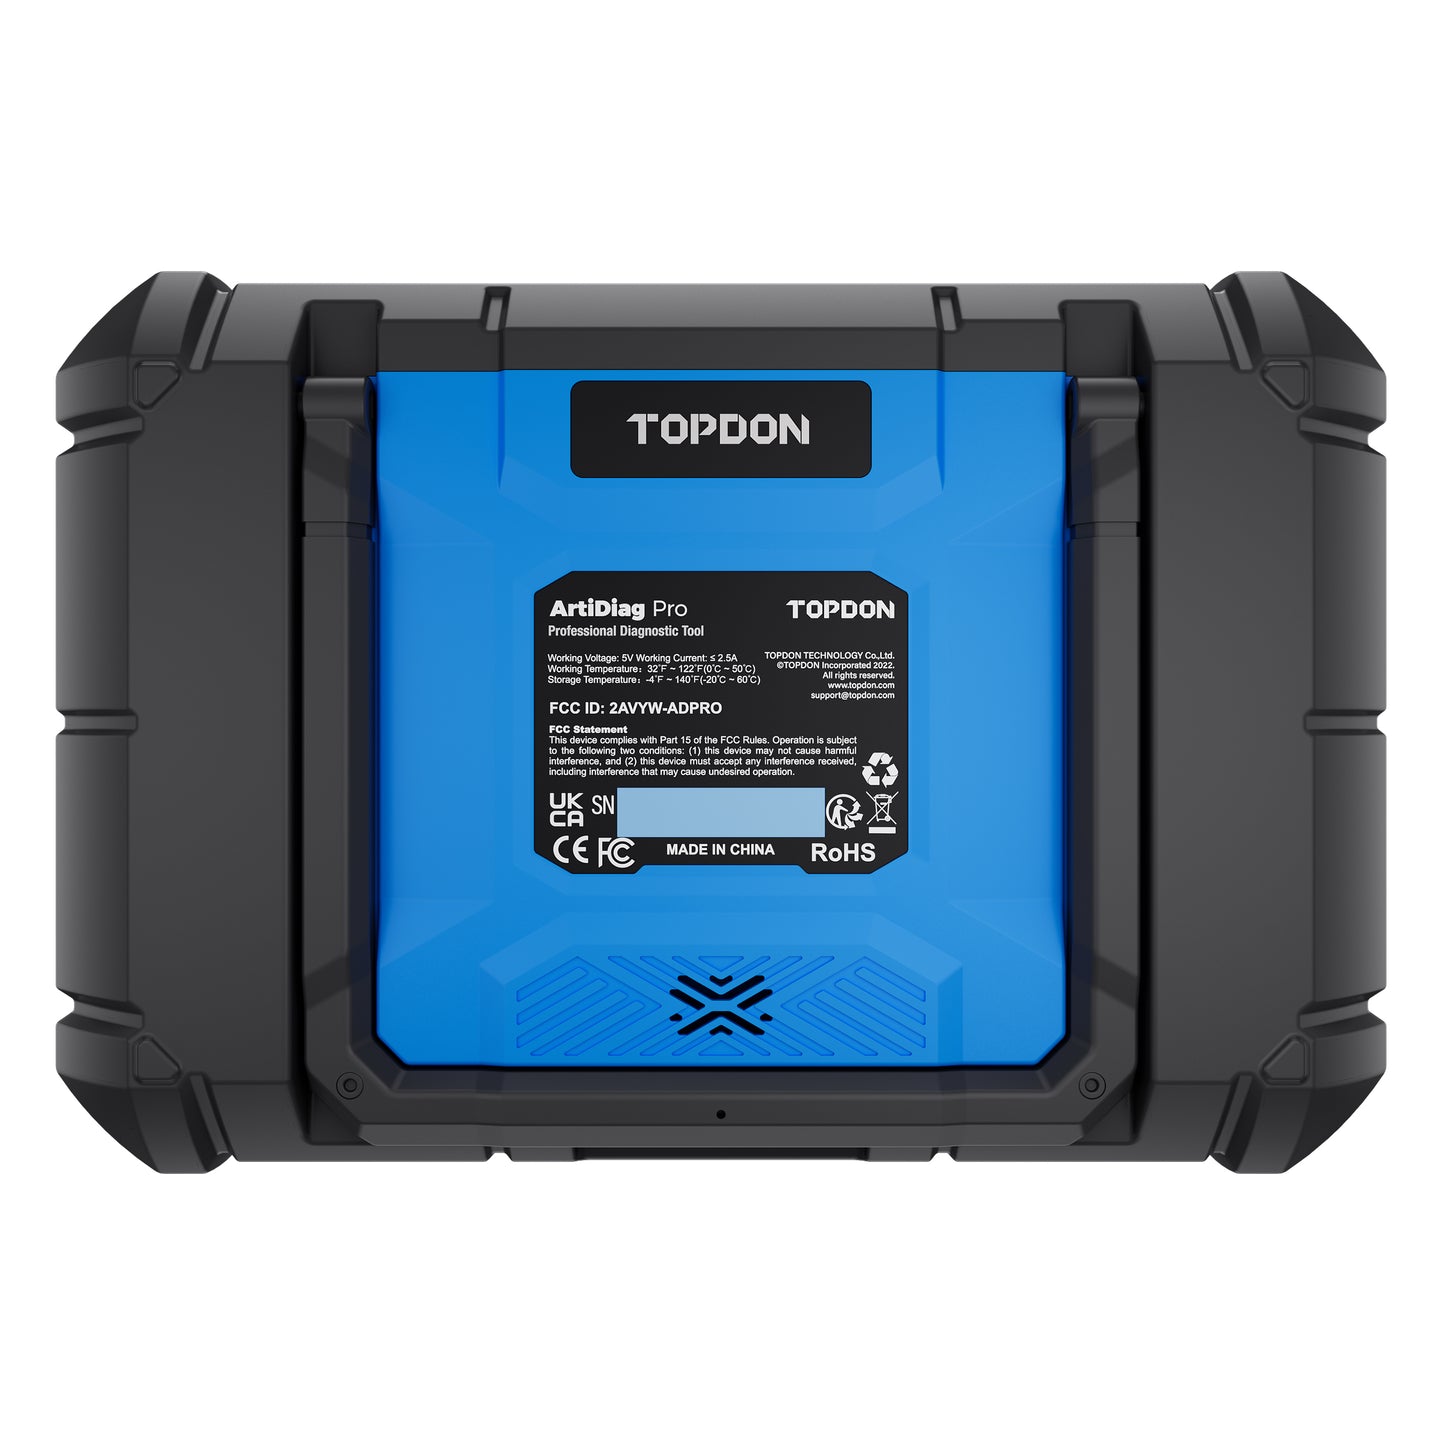 TOPDON  7" Scan Tool w/Service Functions & Bi-Directional Controls